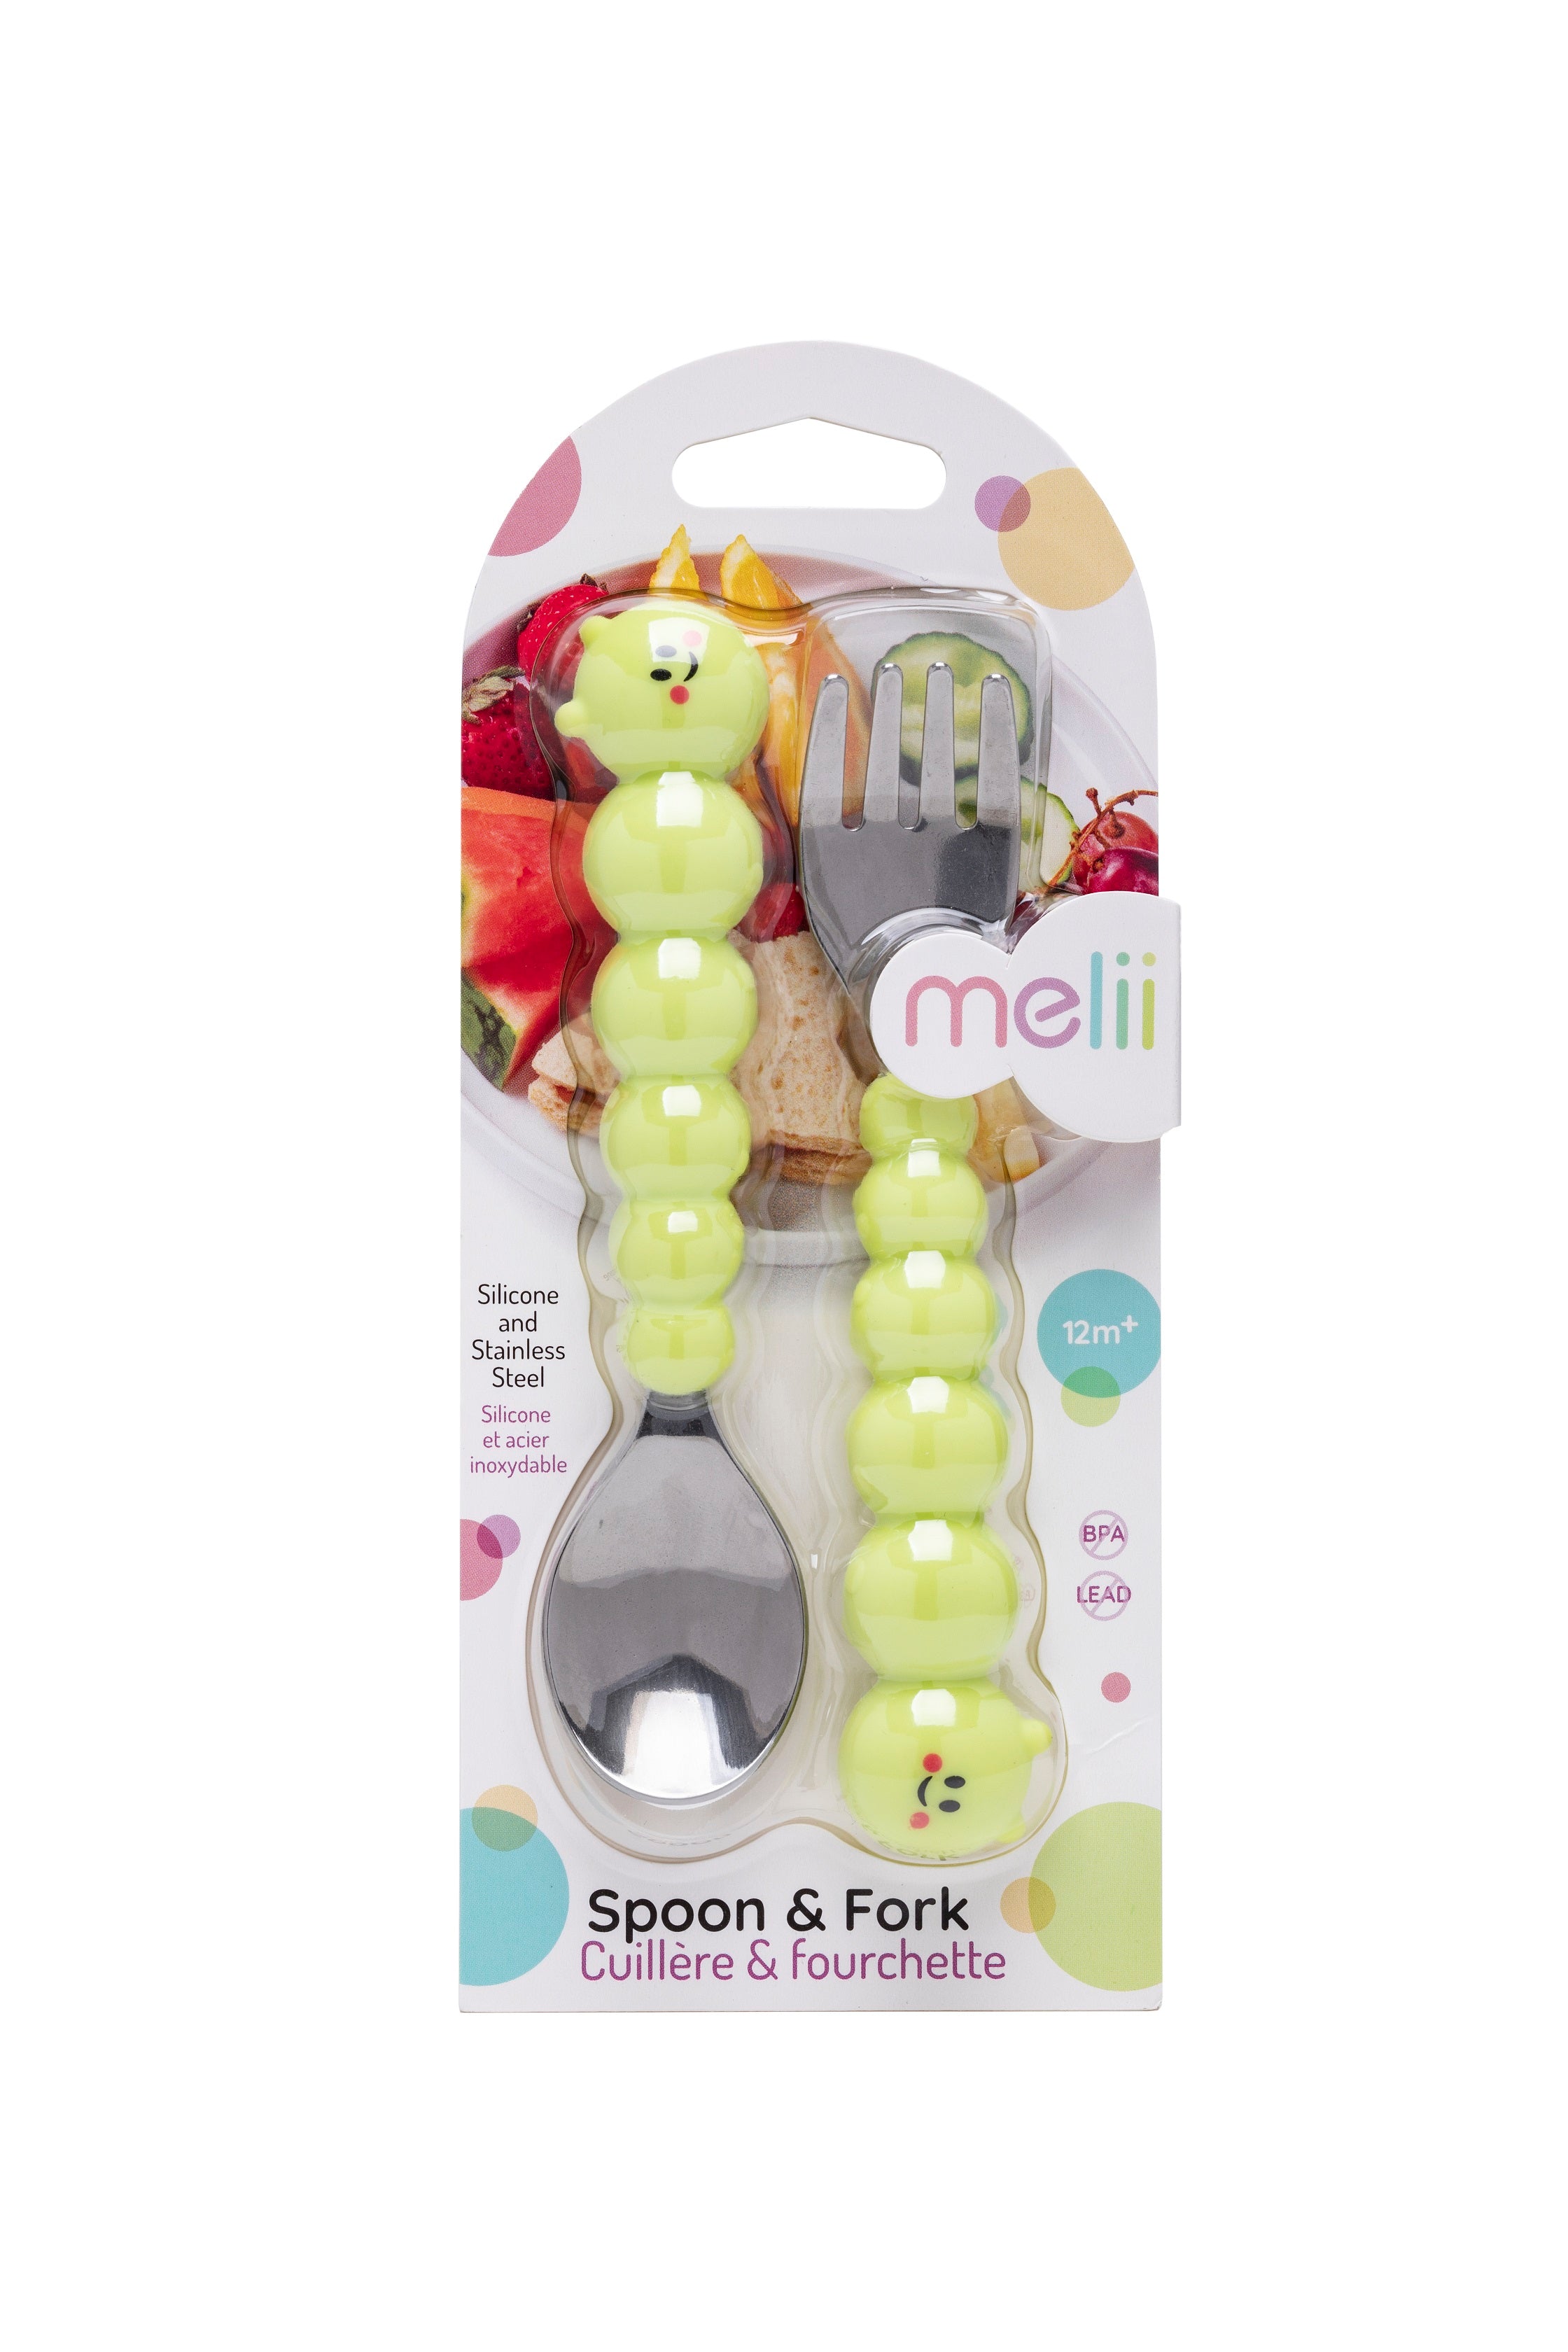 4 pc Baby Infant Spoons BPA Free, Soft Silicone, Self Feeding Fat Handle US